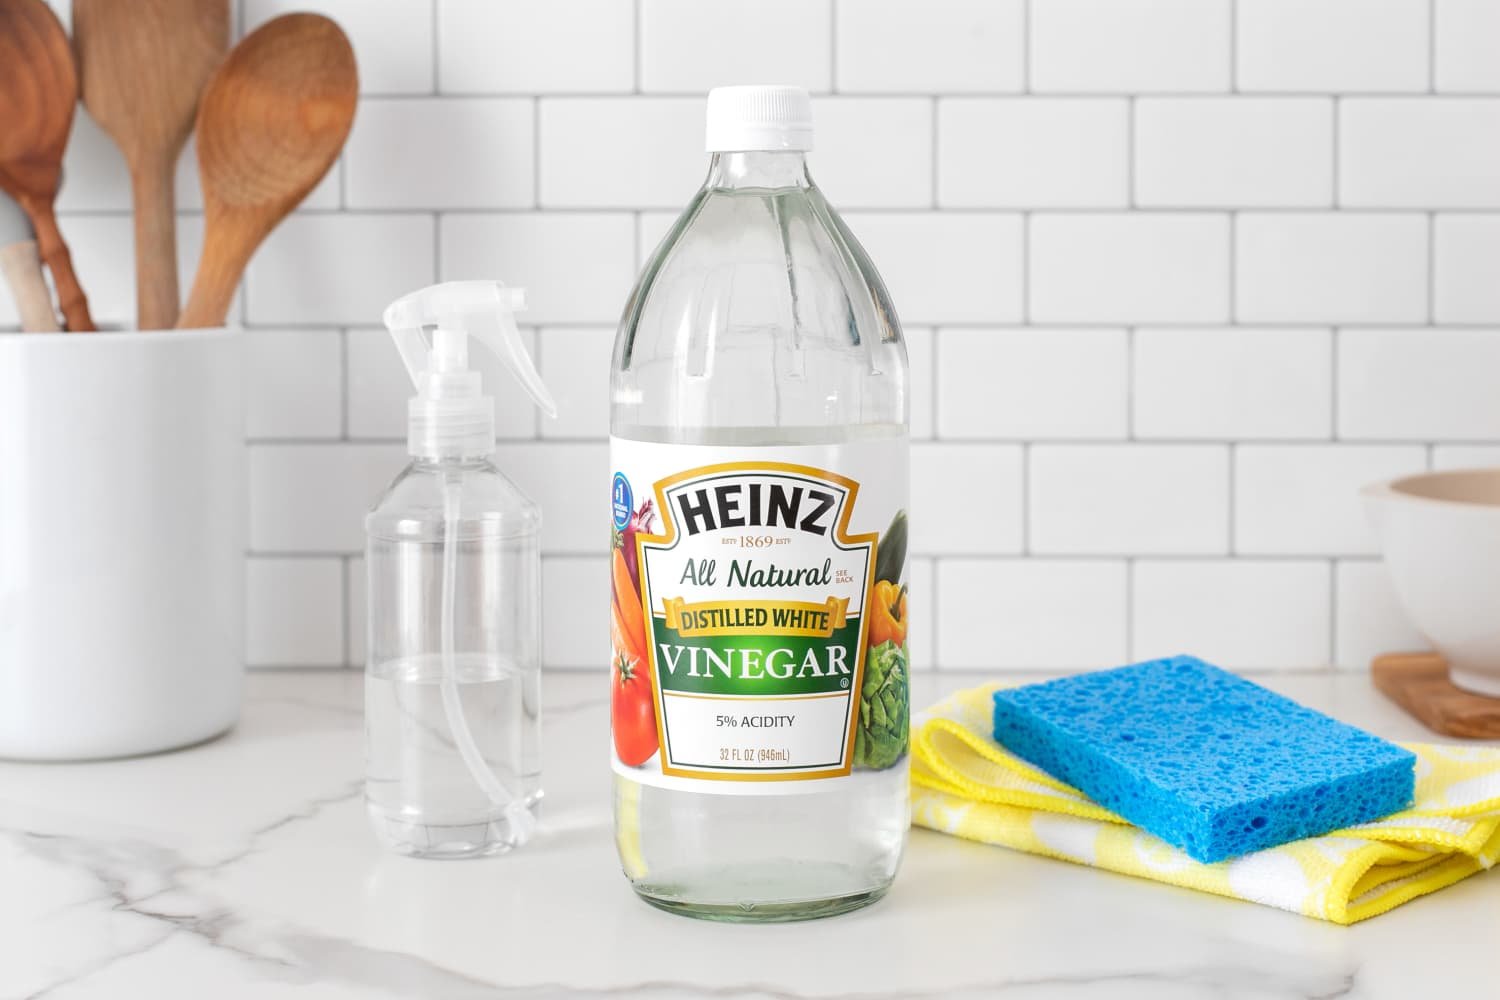 The Very First Thing You Should Do with a New Bottle of Vinegar